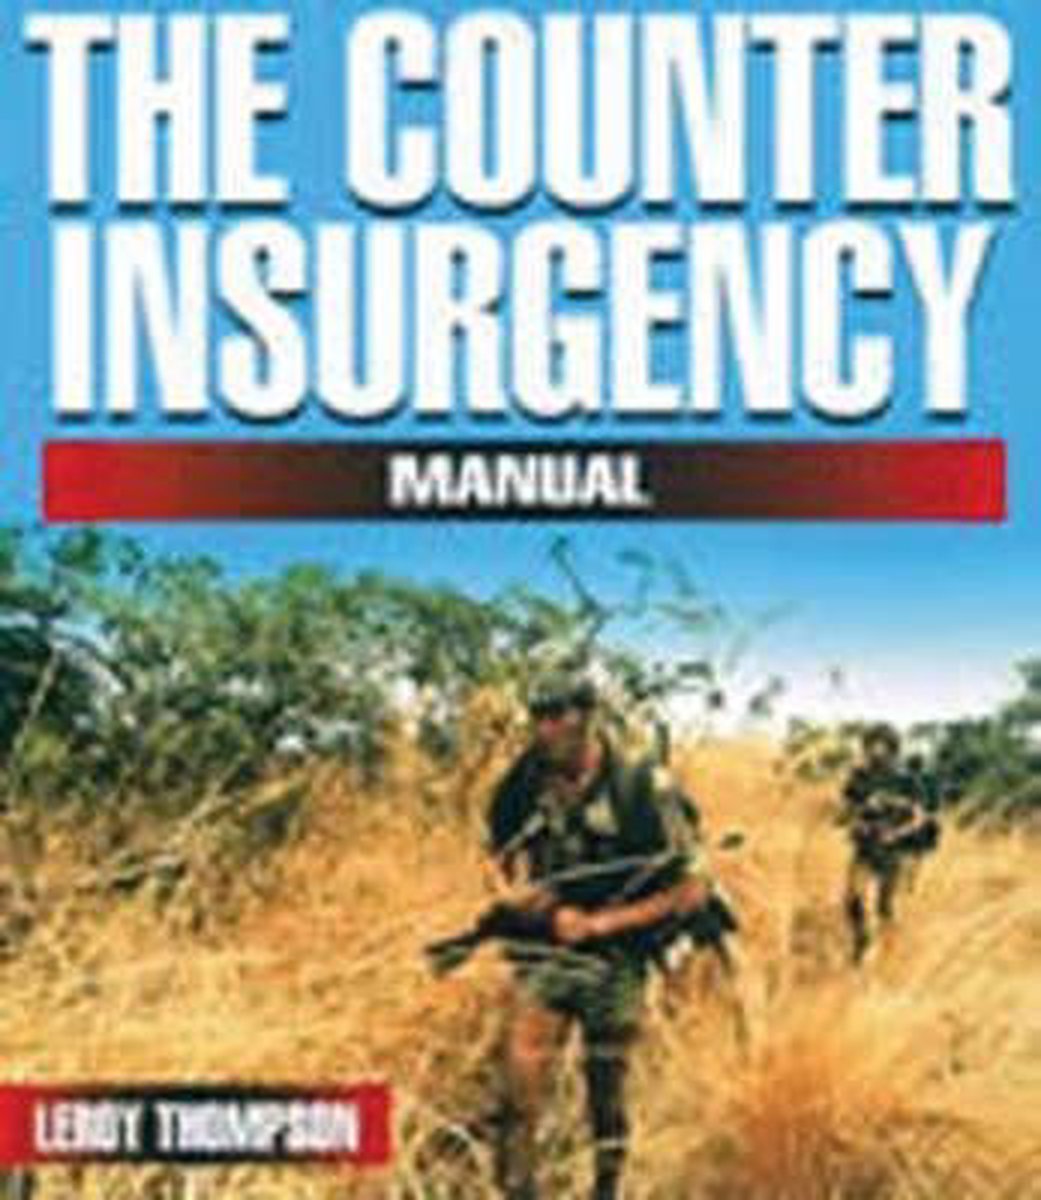 The Counter-Insurgency Manual